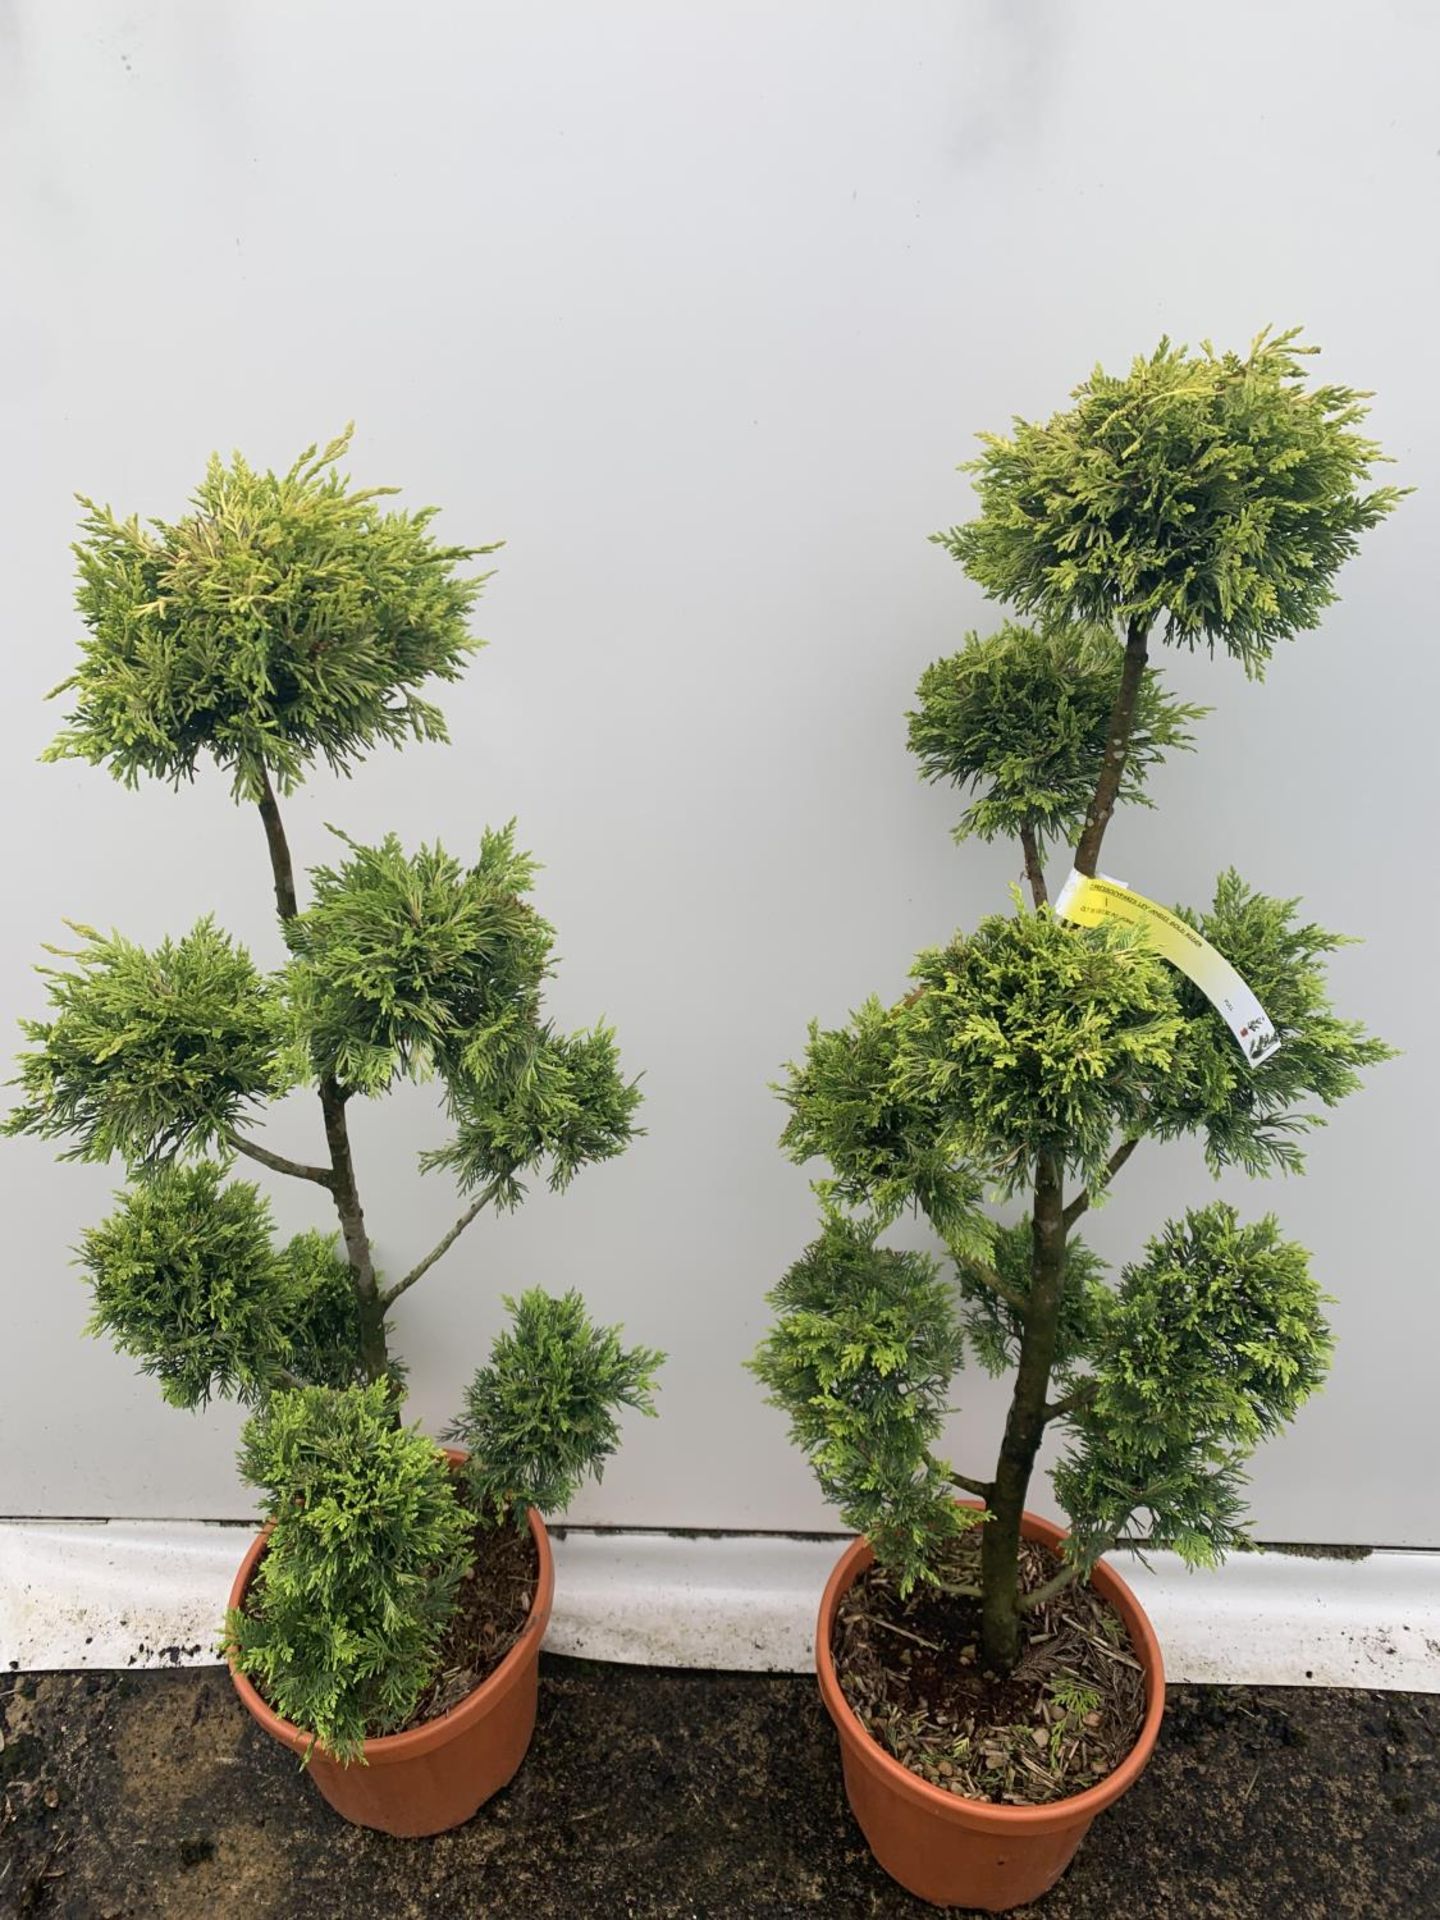 TWO POM POM TREES CUPRESSOCYPARIS LEYLANDII 'GOLD RIDER' APPROX 160CM IN HEIGHT IN 15 LTR POTS - Image 5 of 5